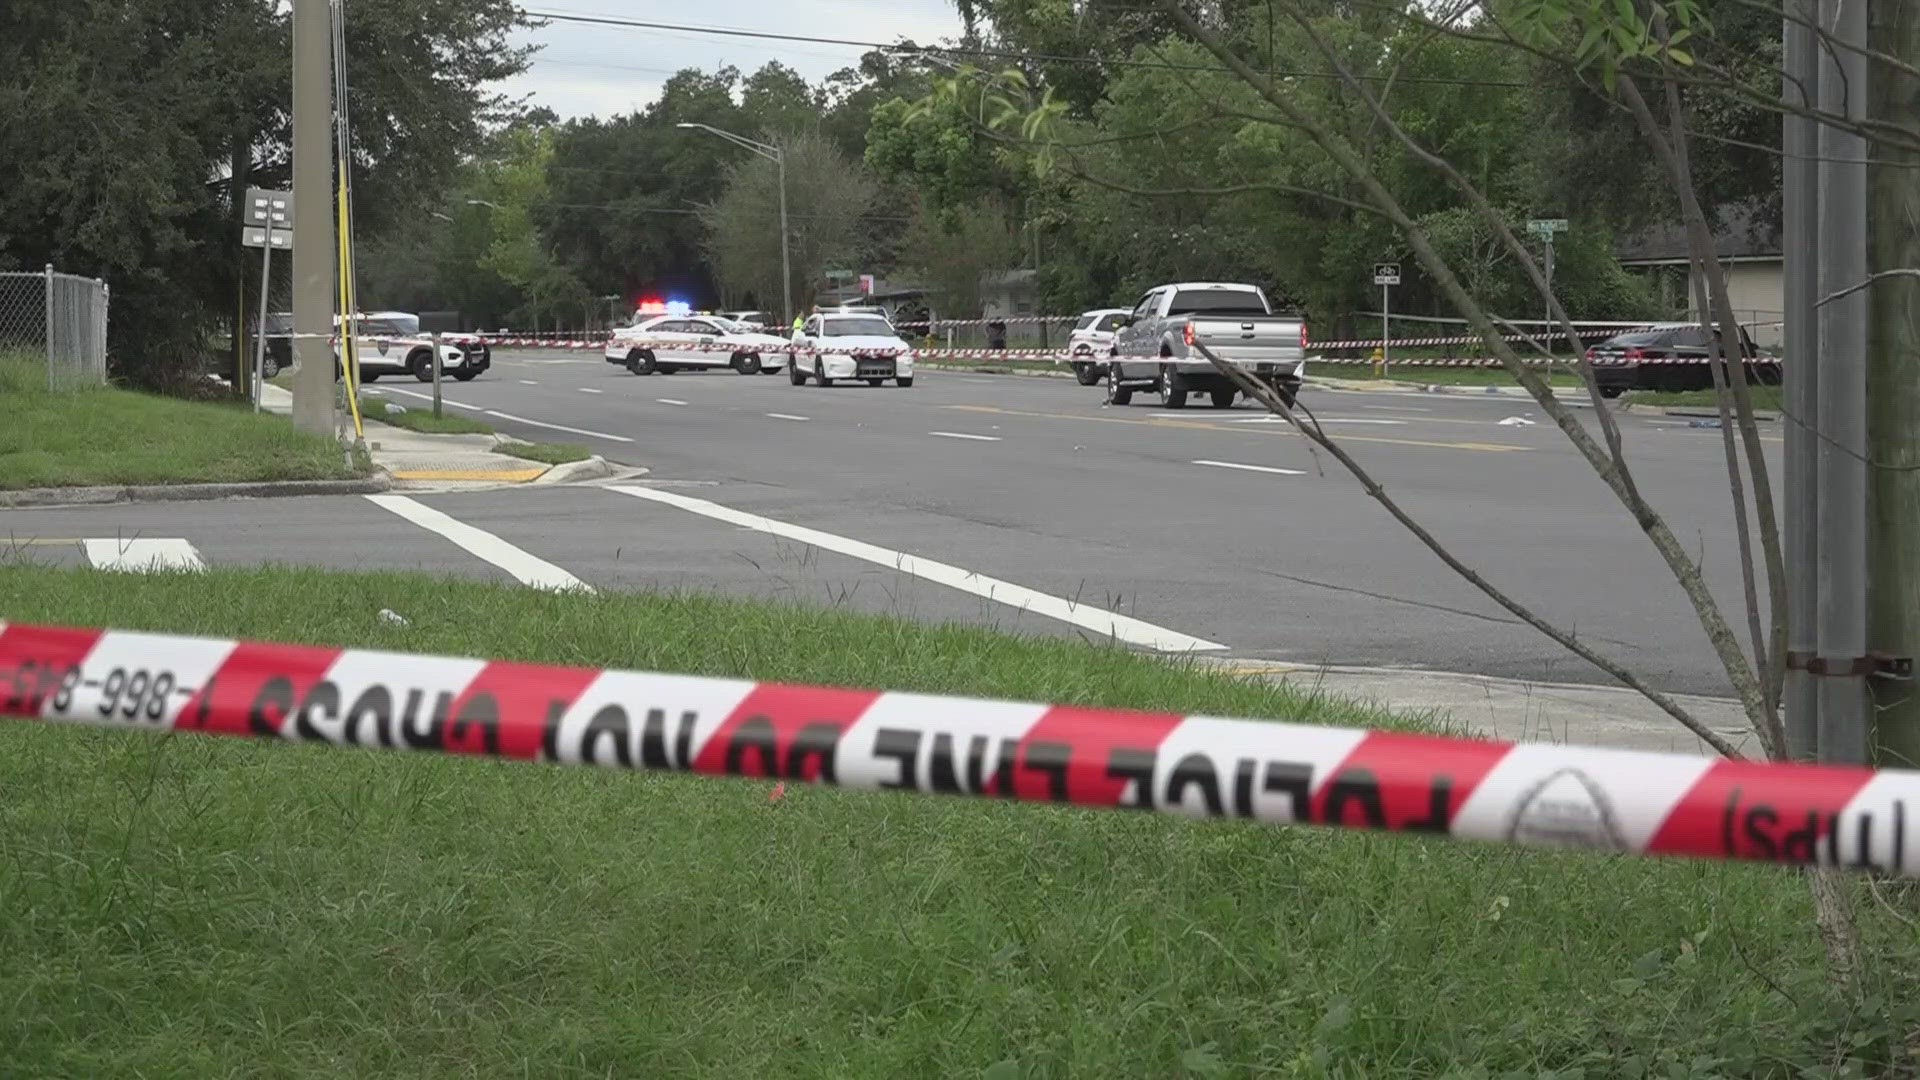 JSO says at approximately 7 a.m., the 12-year-old boy and his brother were being chased by the dog on Lane Avenue South when the 12-year-old was hit by a Chevrolet.